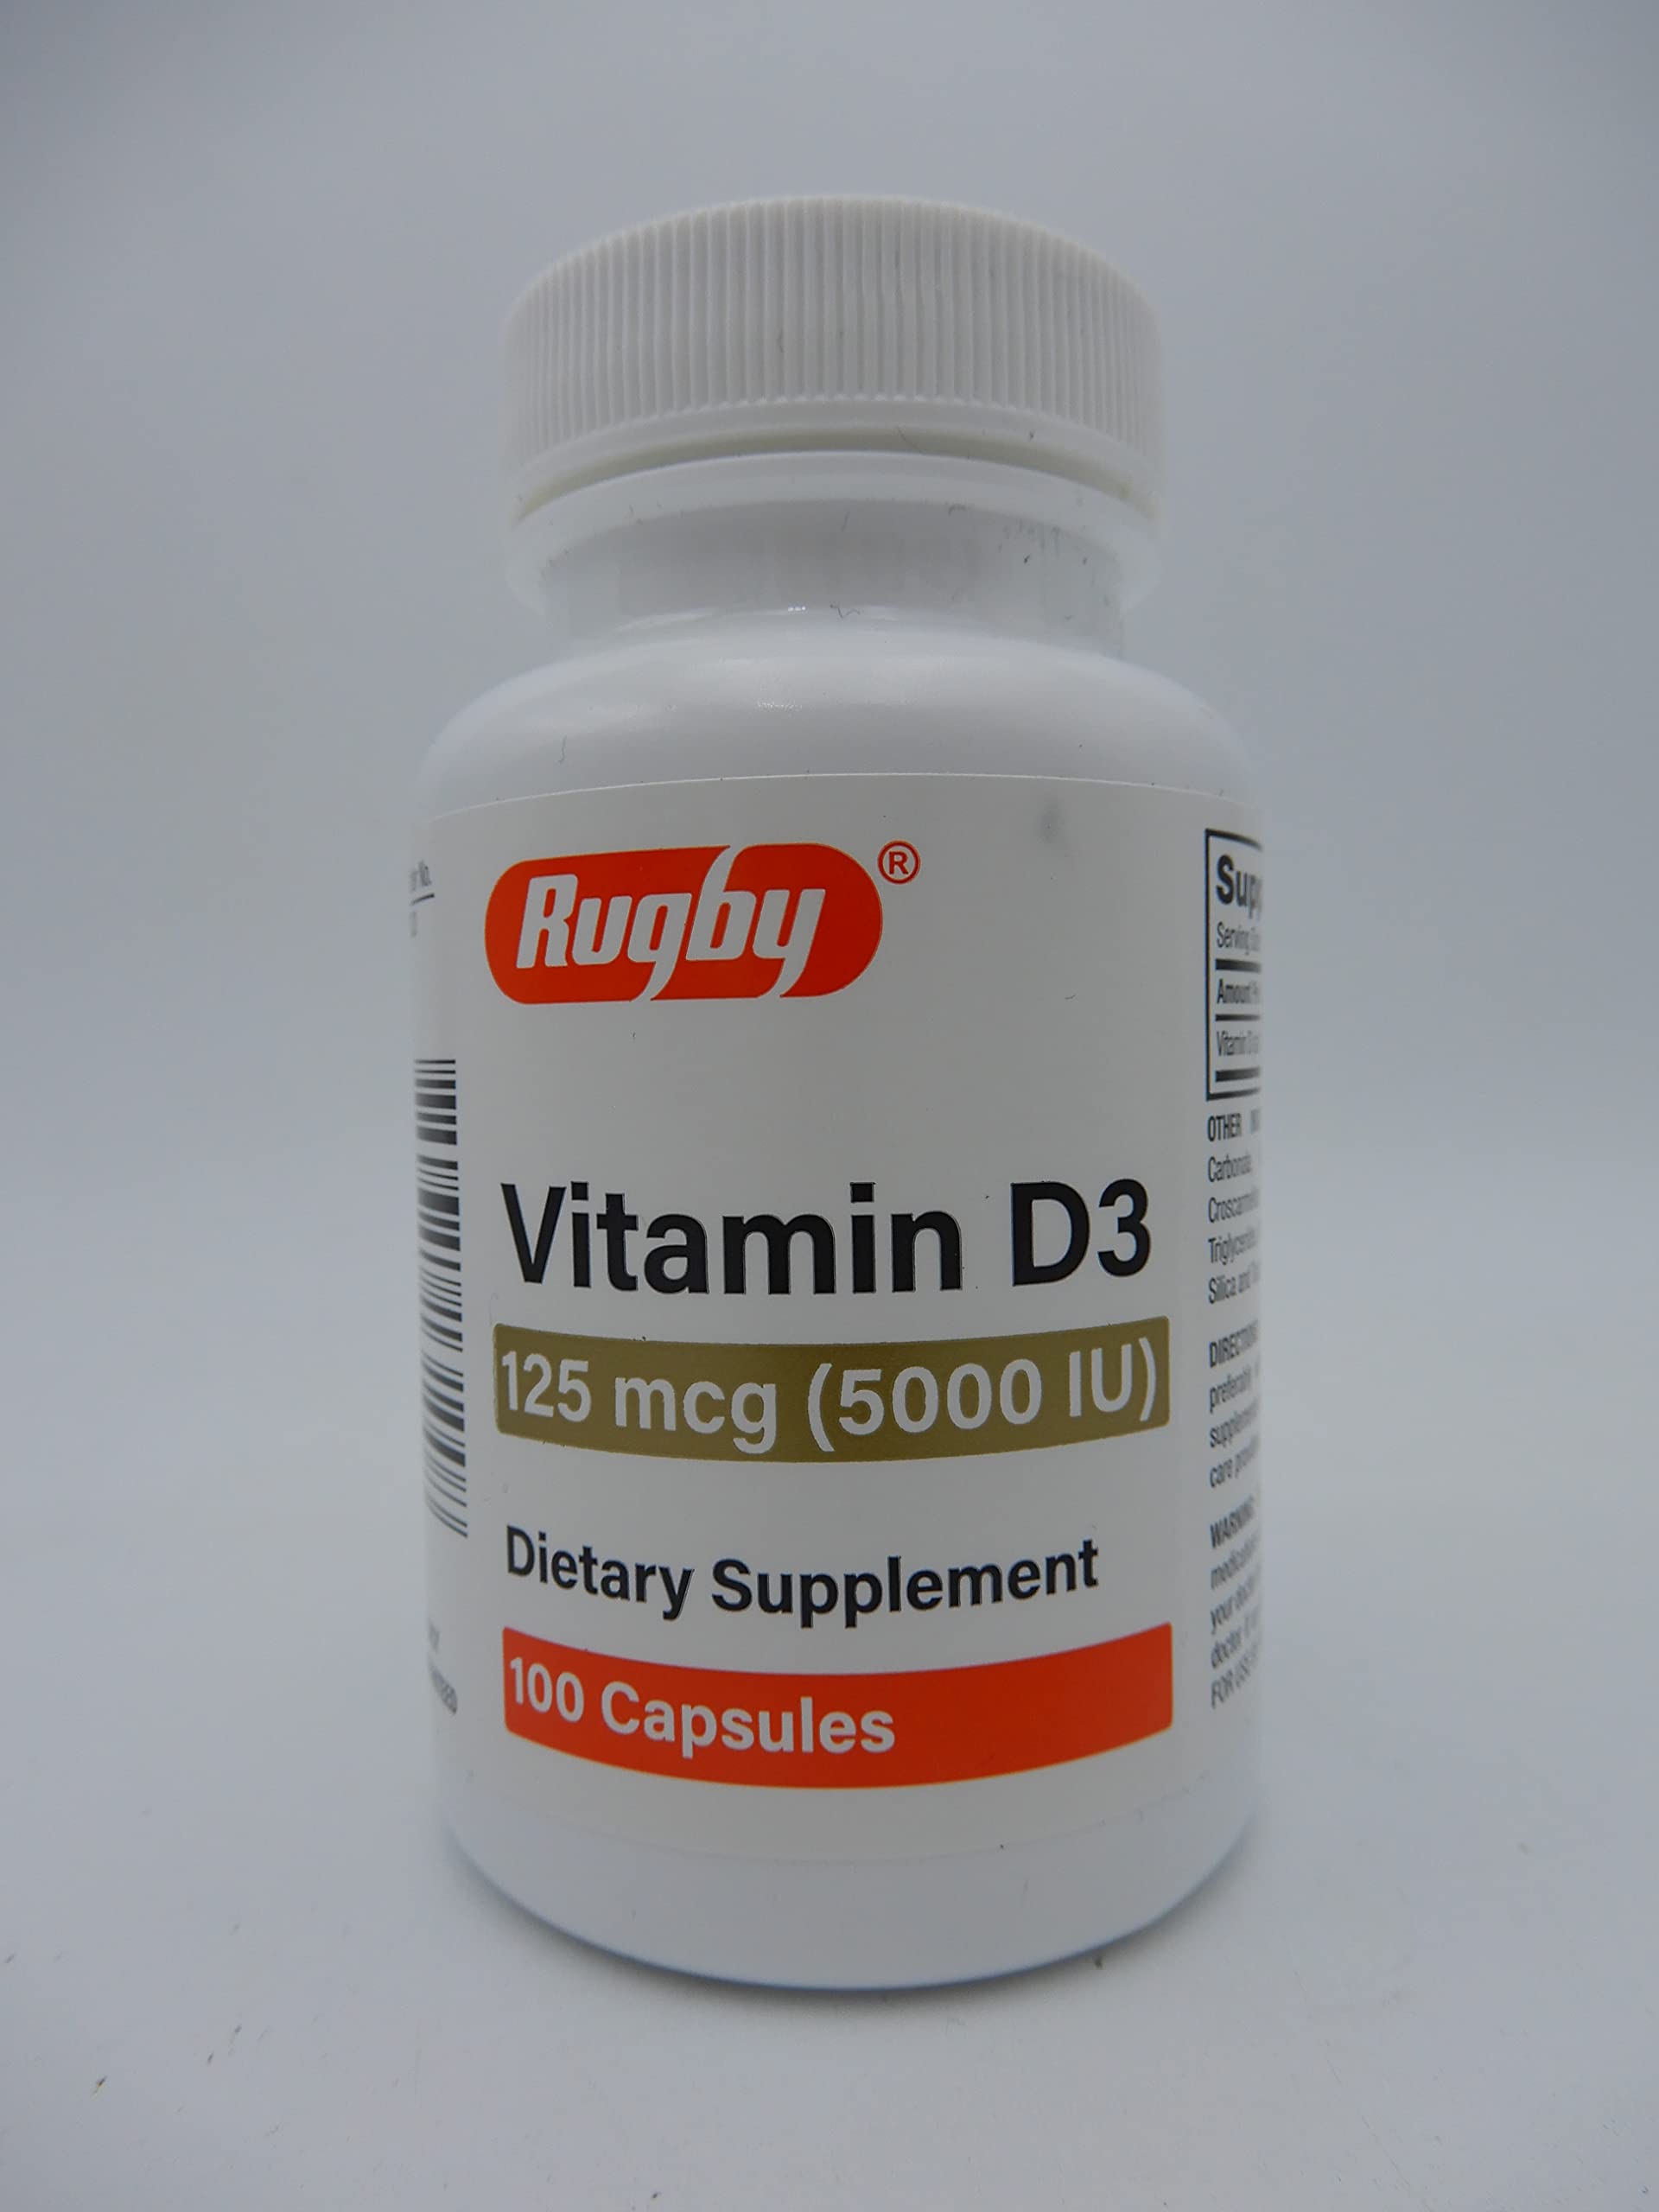 Rugby ViItamin D3, 125 mcg, 100 Capsules (Pack of 1)